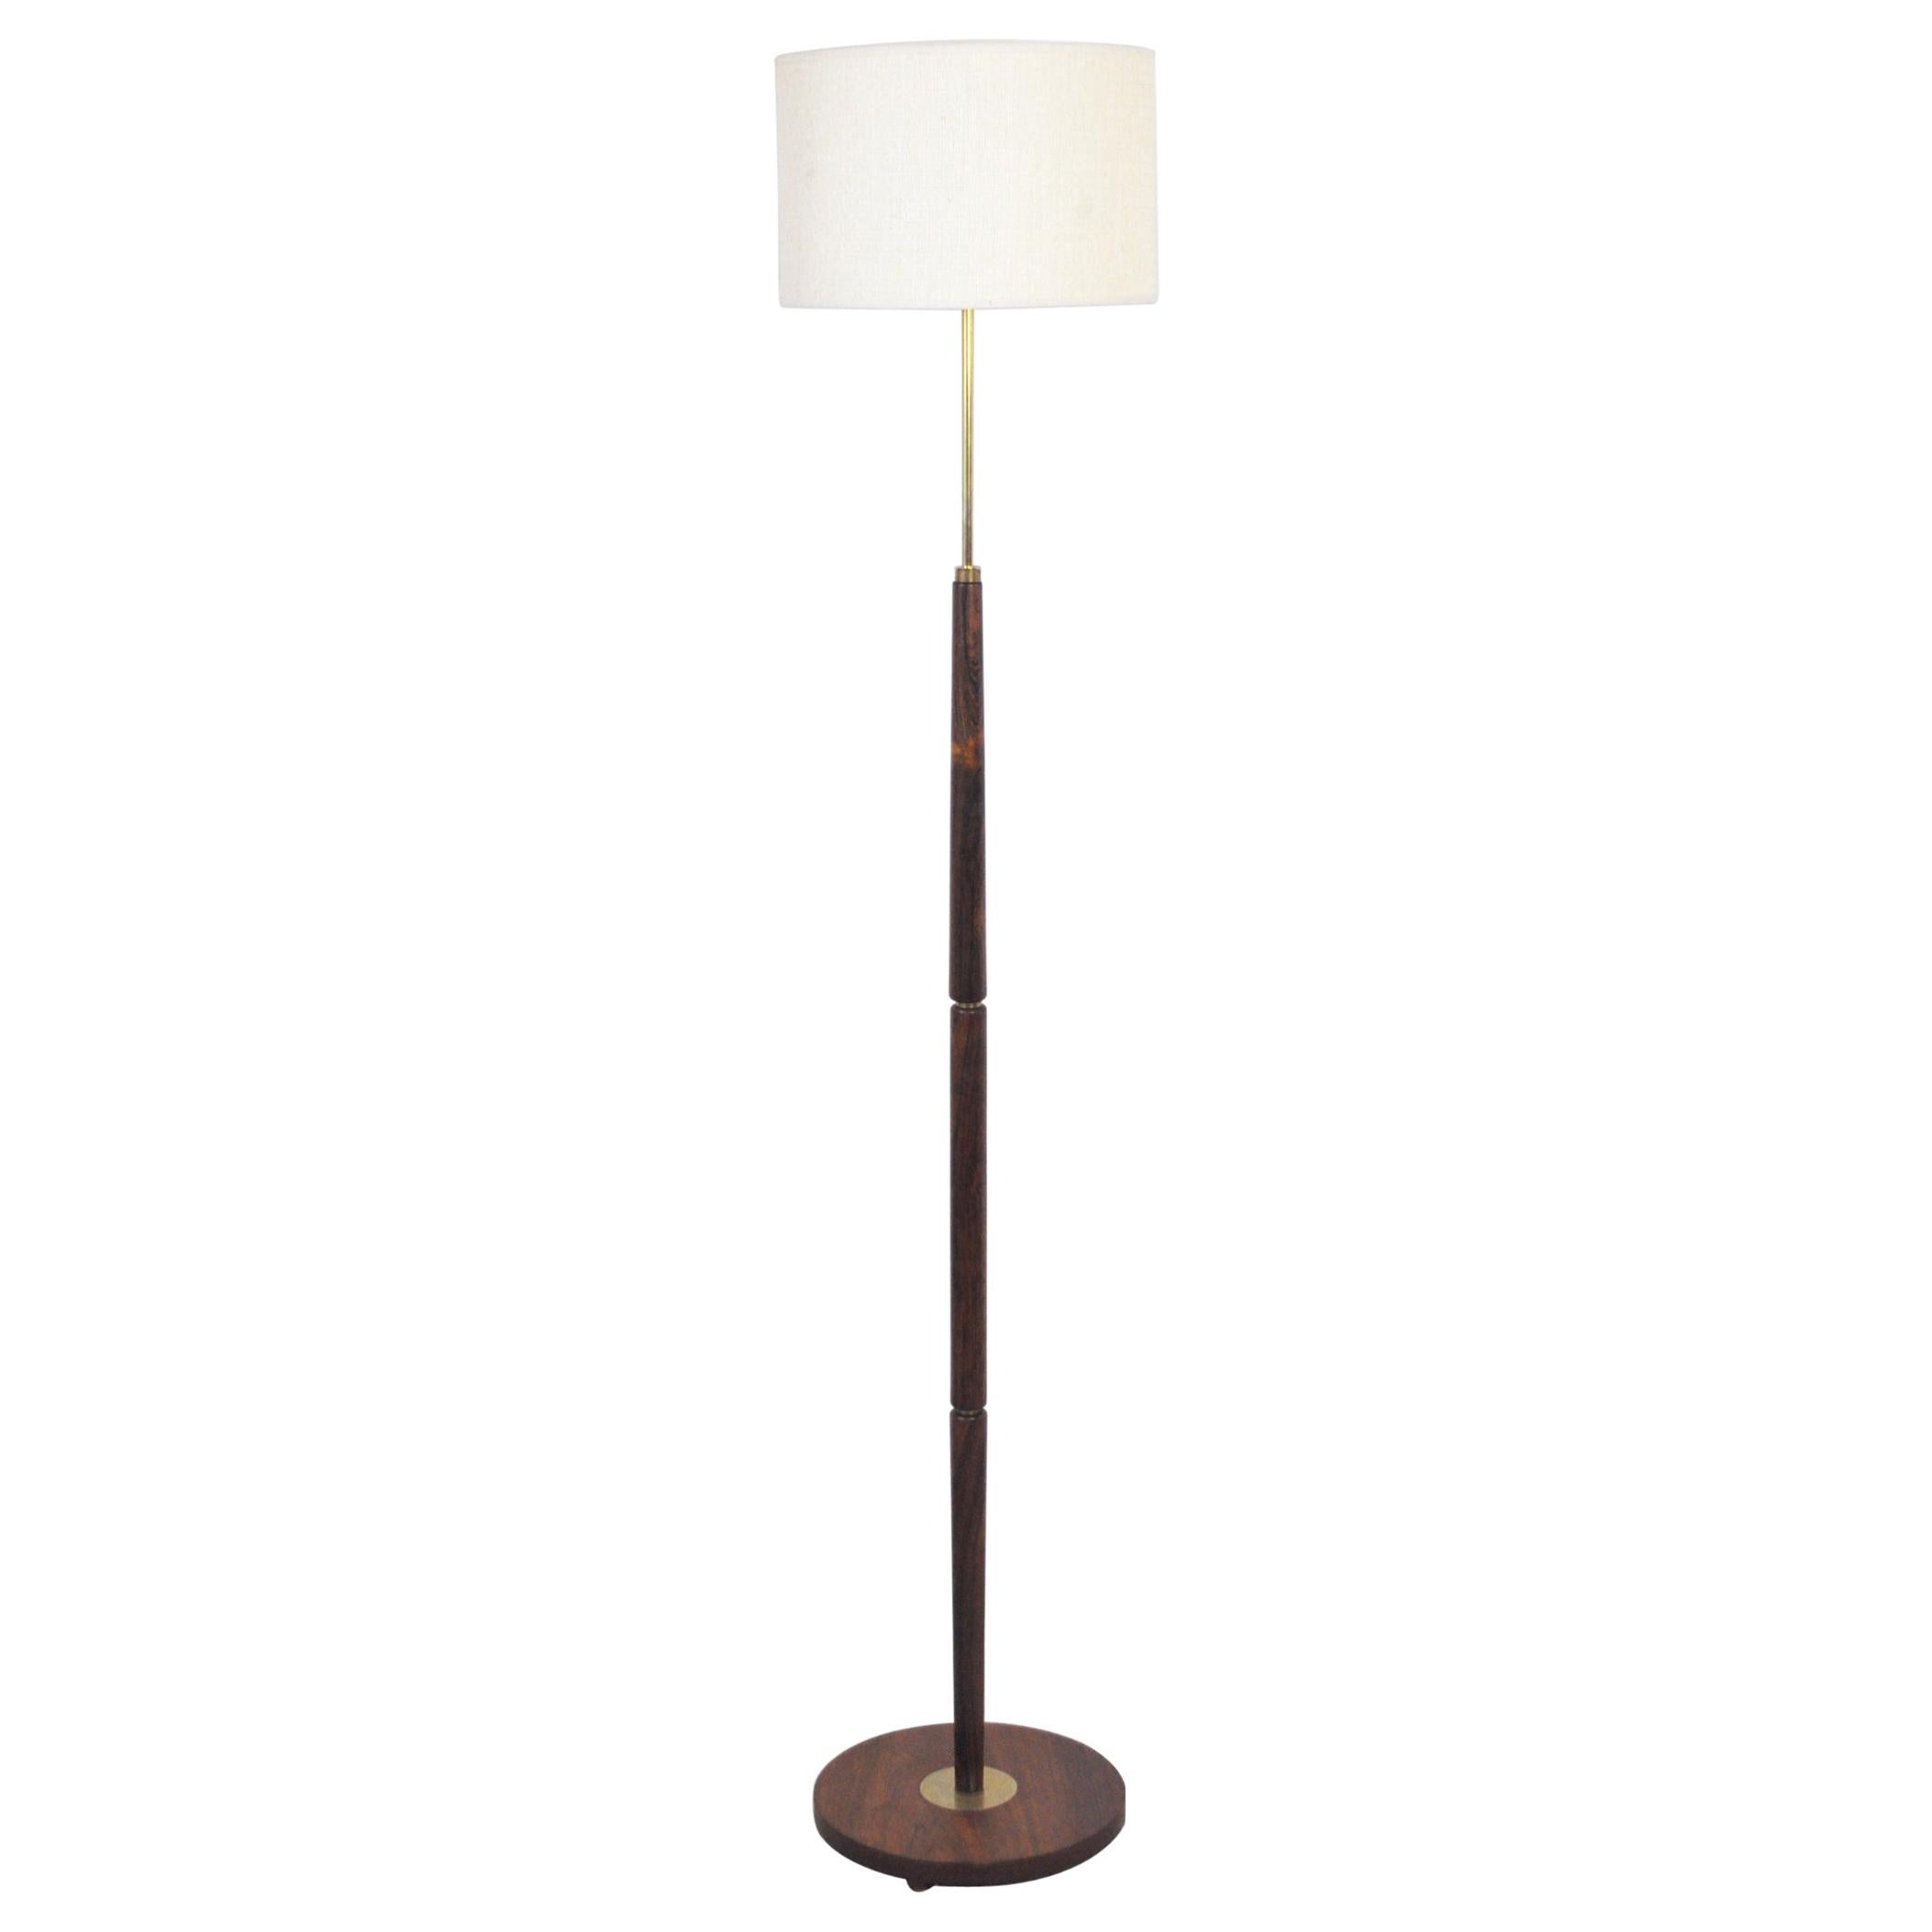 Mid-Century Modern Danish Rosewood Floor Lamp with Brass Details, 1960s For Sale